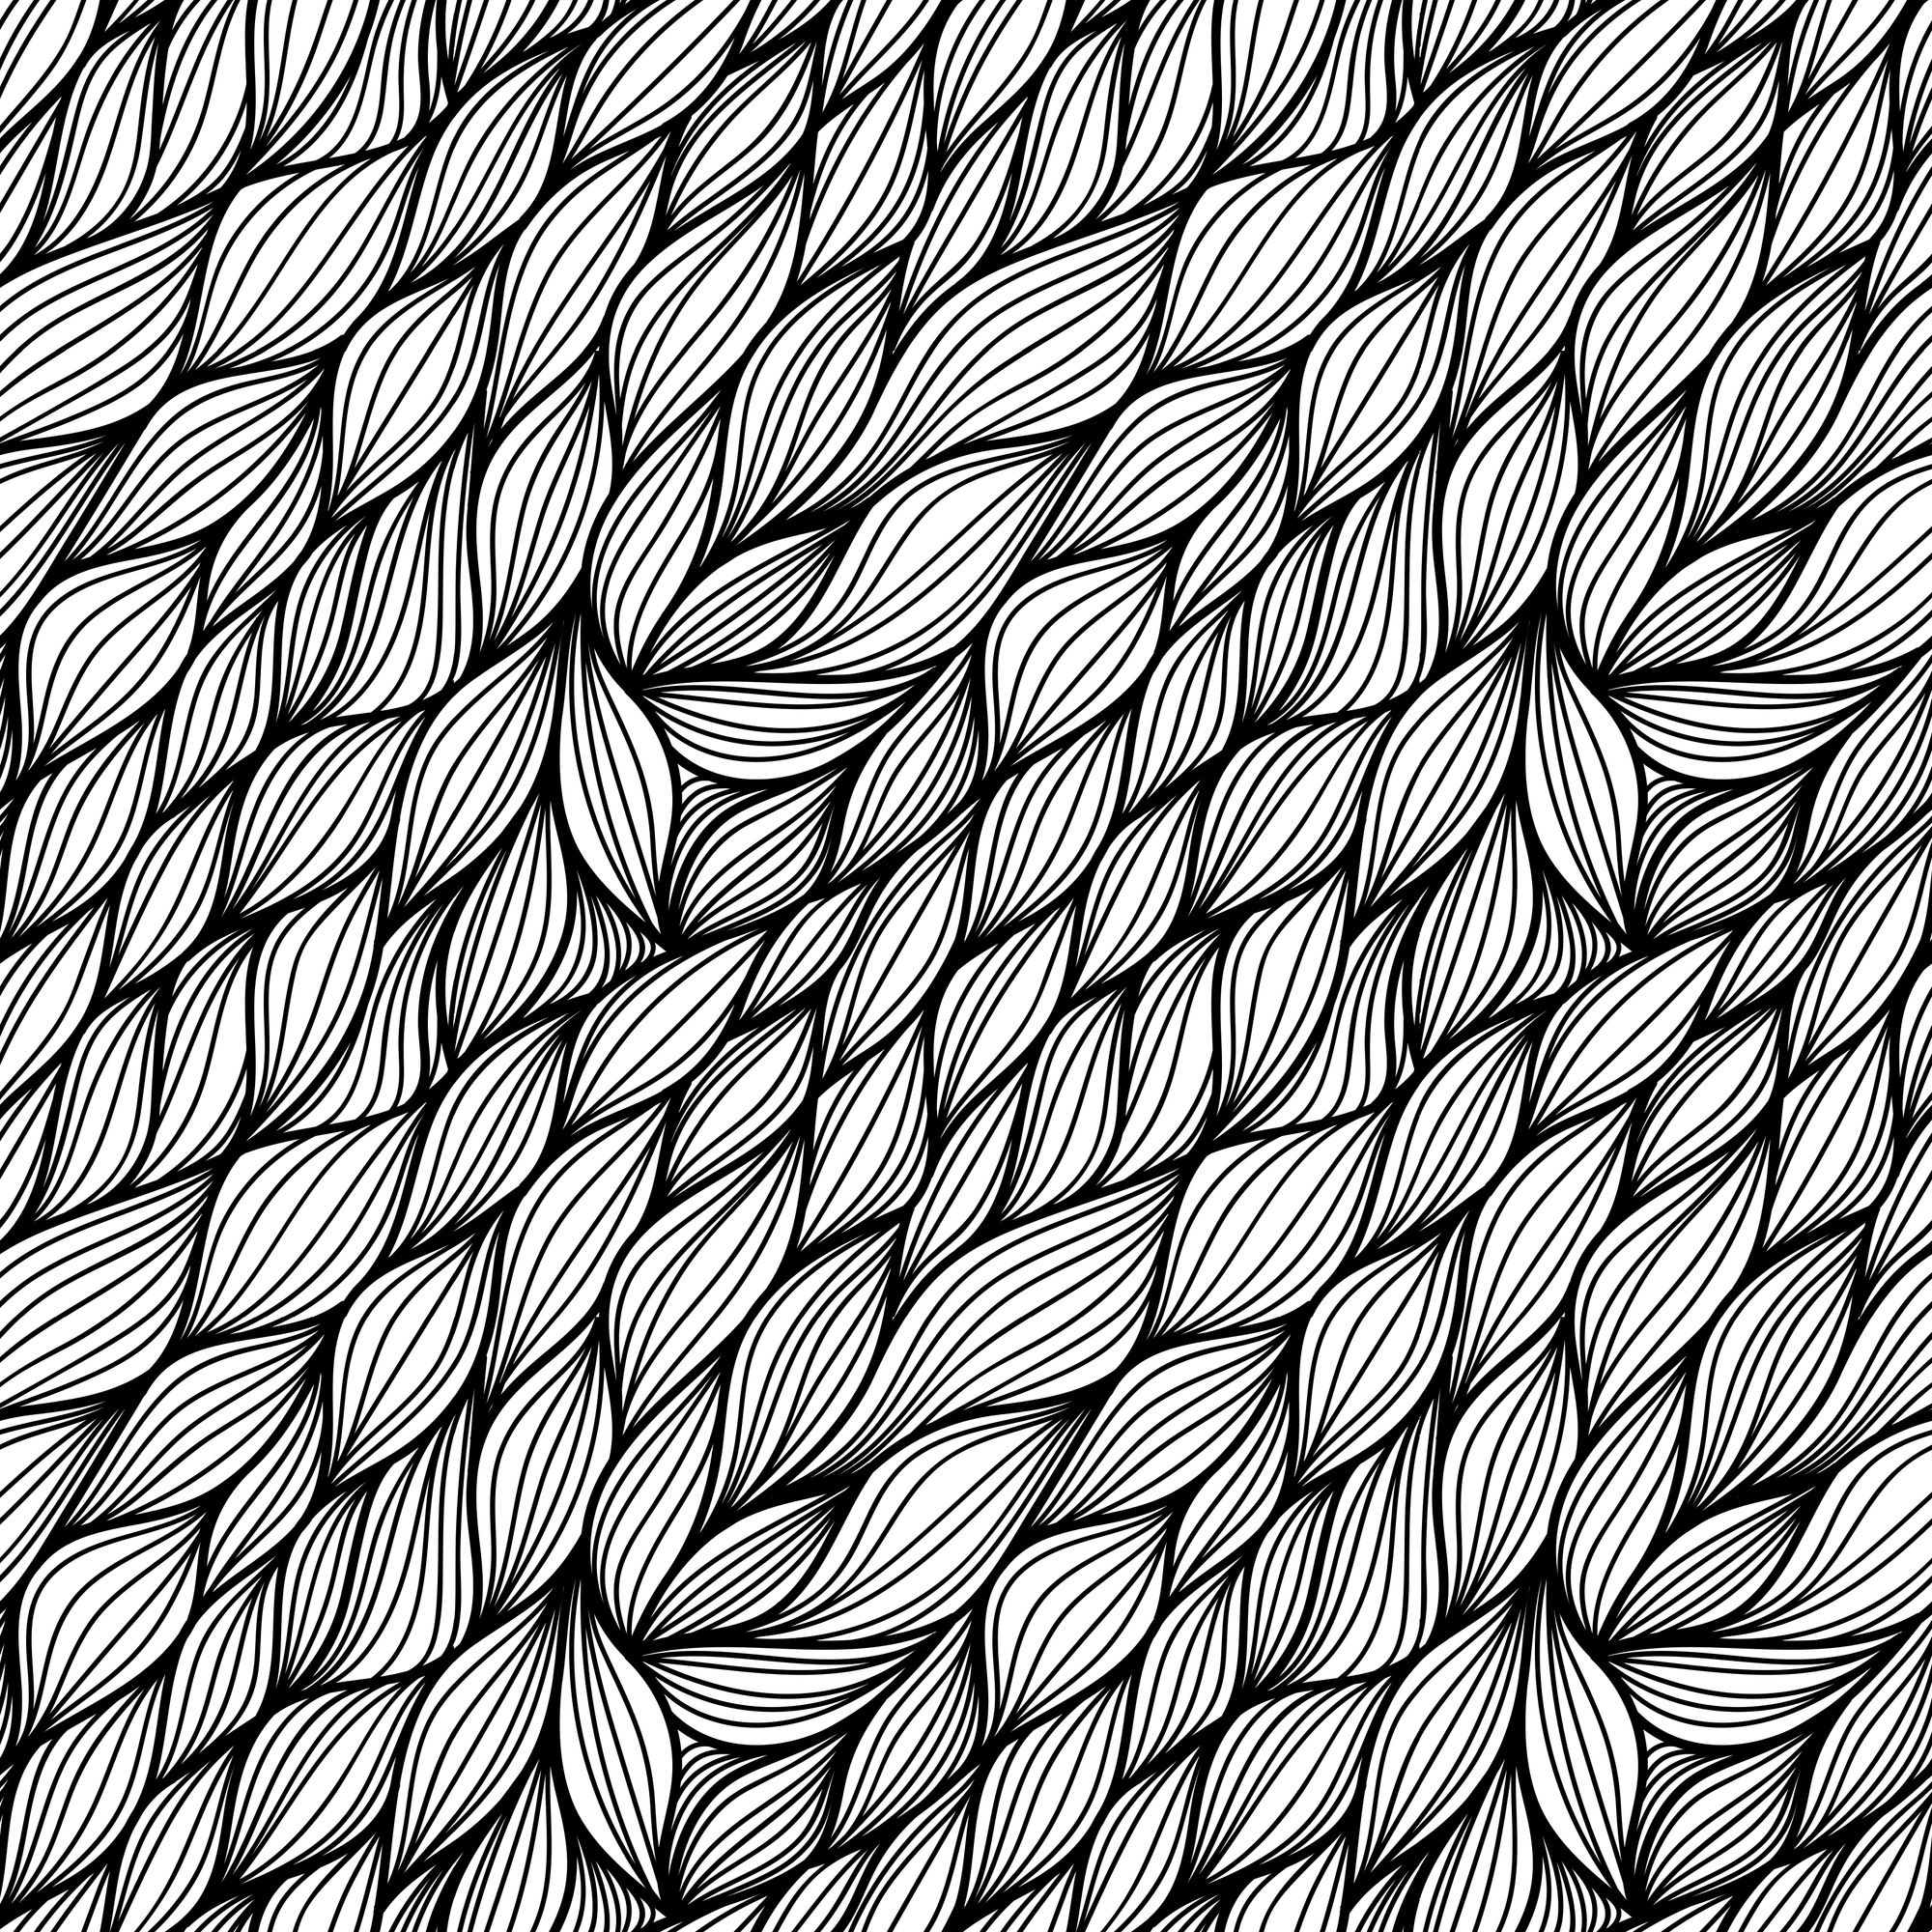 A repeating pattern of curved lines that look almost woven together.